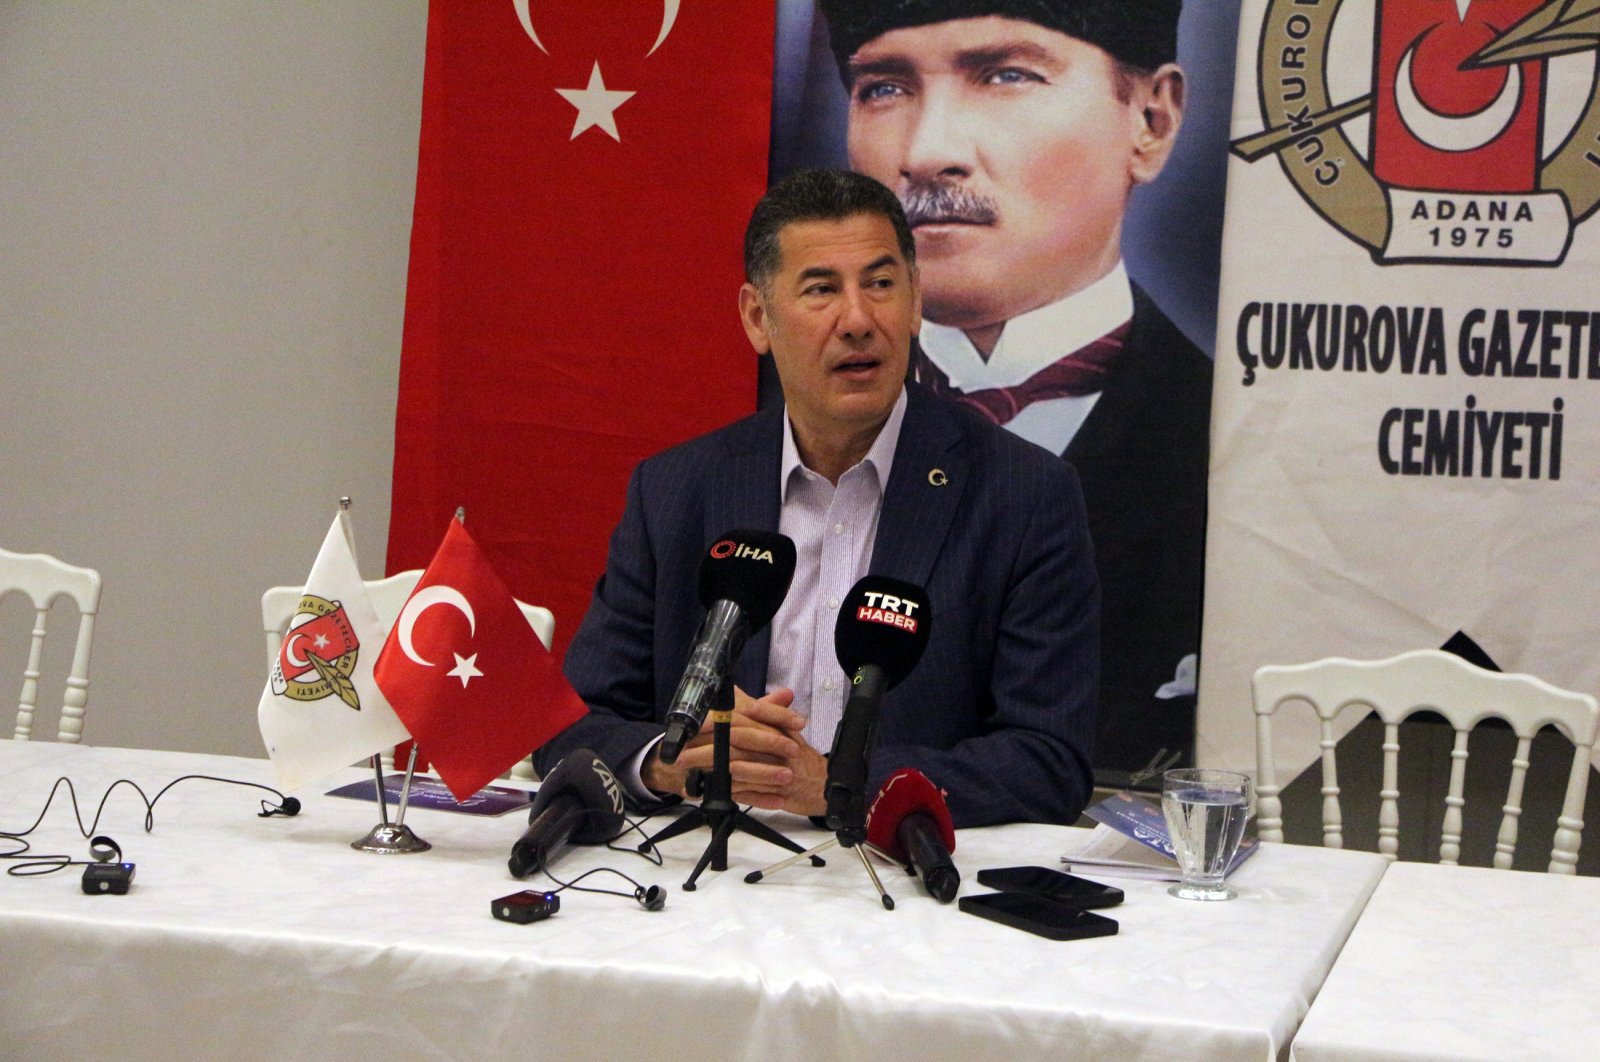 Turkish presidential candidate Sinan Oğan speaks at a news conference in the southern Adana province, Türkiye, May 11, 2023. (DHA Photo)